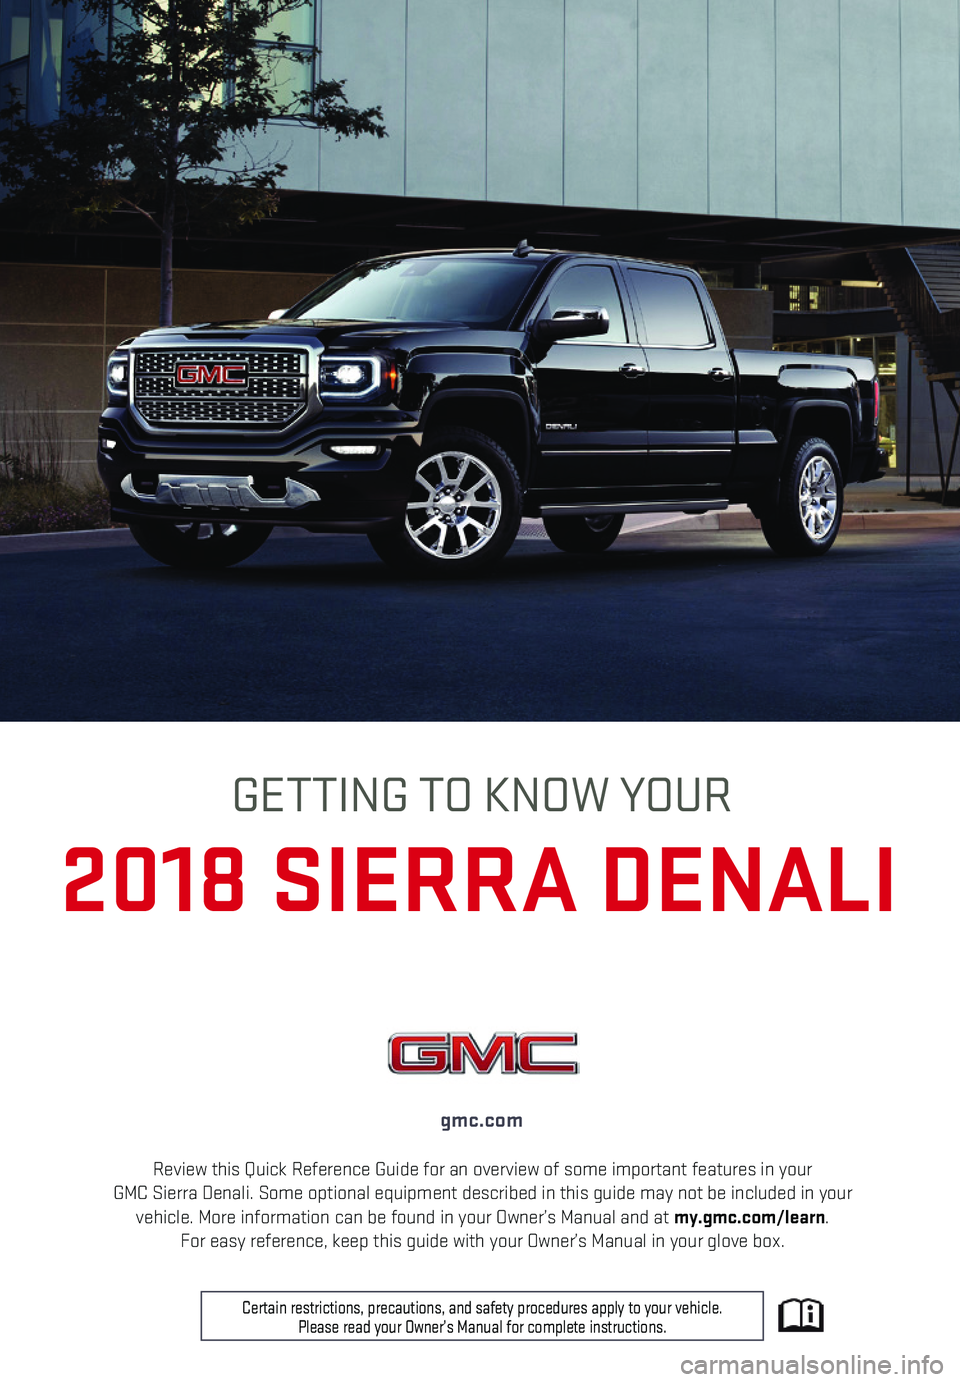 GMC SIERRA 2018  Get To Know Guide 1
Review this Quick Reference Guide for an overview of some important feat\
ures in your  GMC Sierra Denali. Some optional equipment described in this guide may n\
ot be included in your vehicle. More